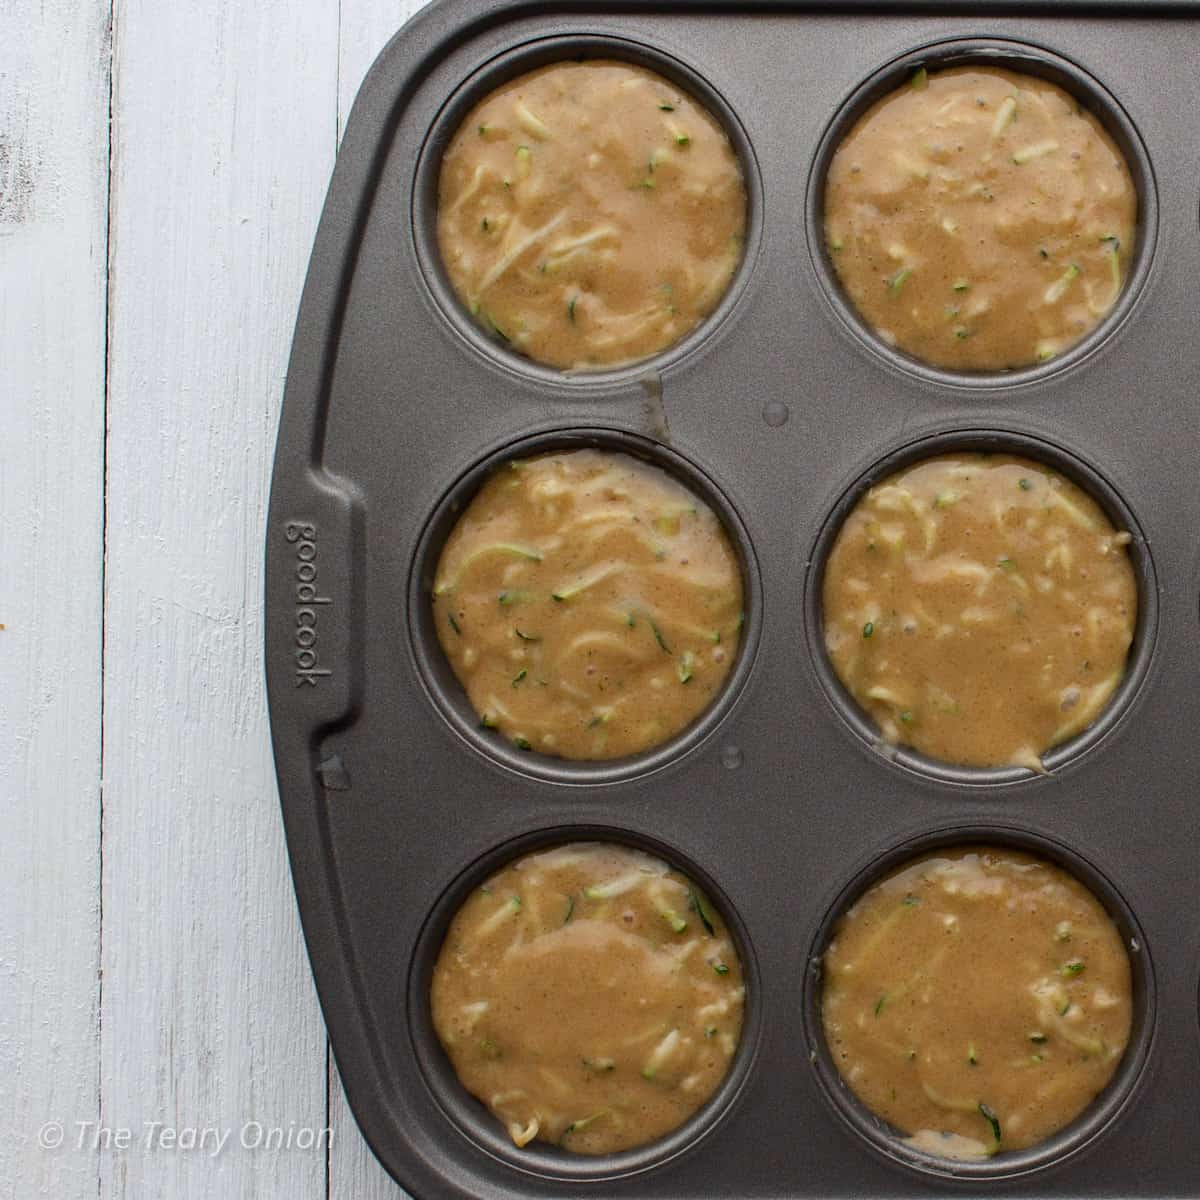 muffin batter in the muffin pan.